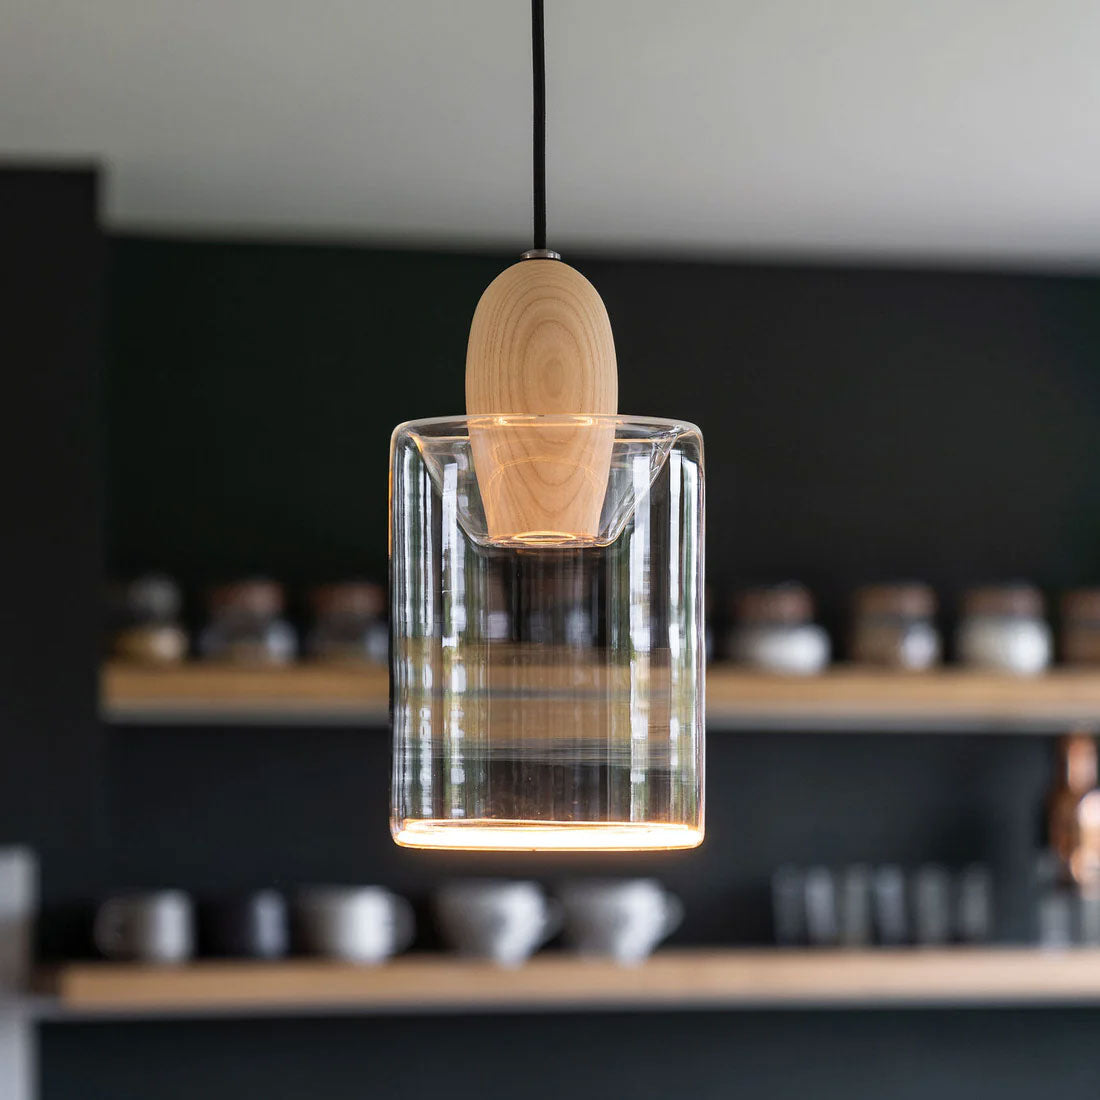 You can hang the Azure Cylinder glass pendant light bulb in your kitchen, as shown here